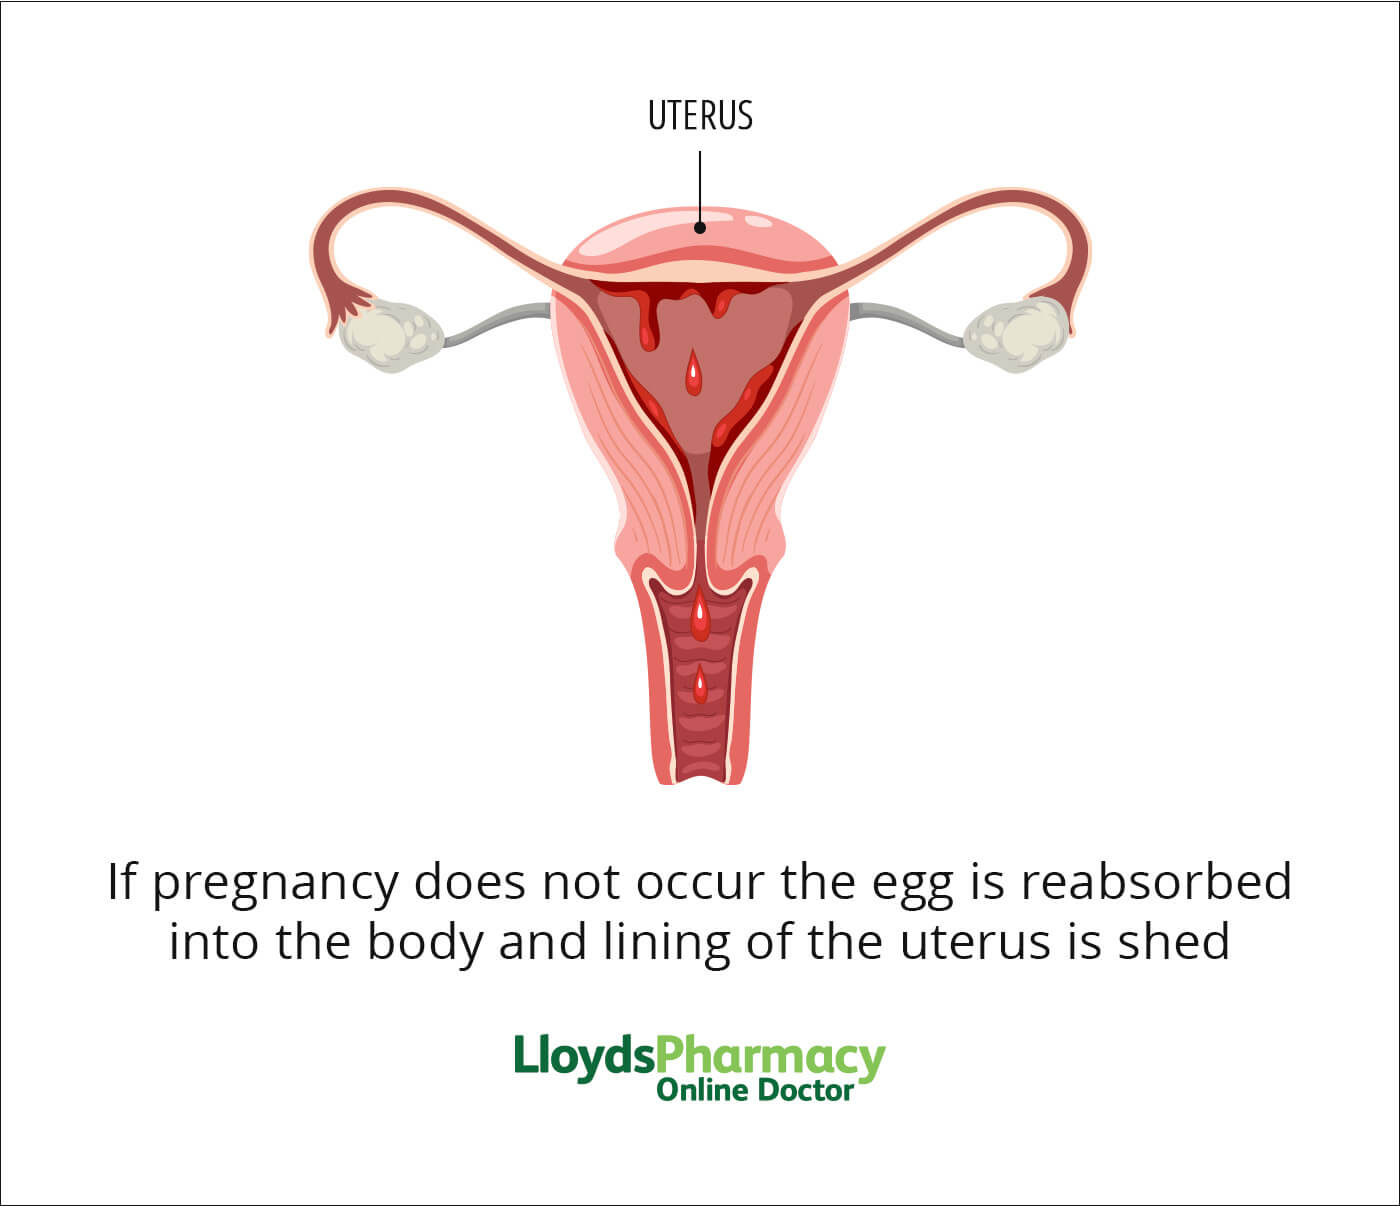 Menstrual cycle - if pregnancy does not occur the egg is reabsorbed into the body and lining of the uterus is shed